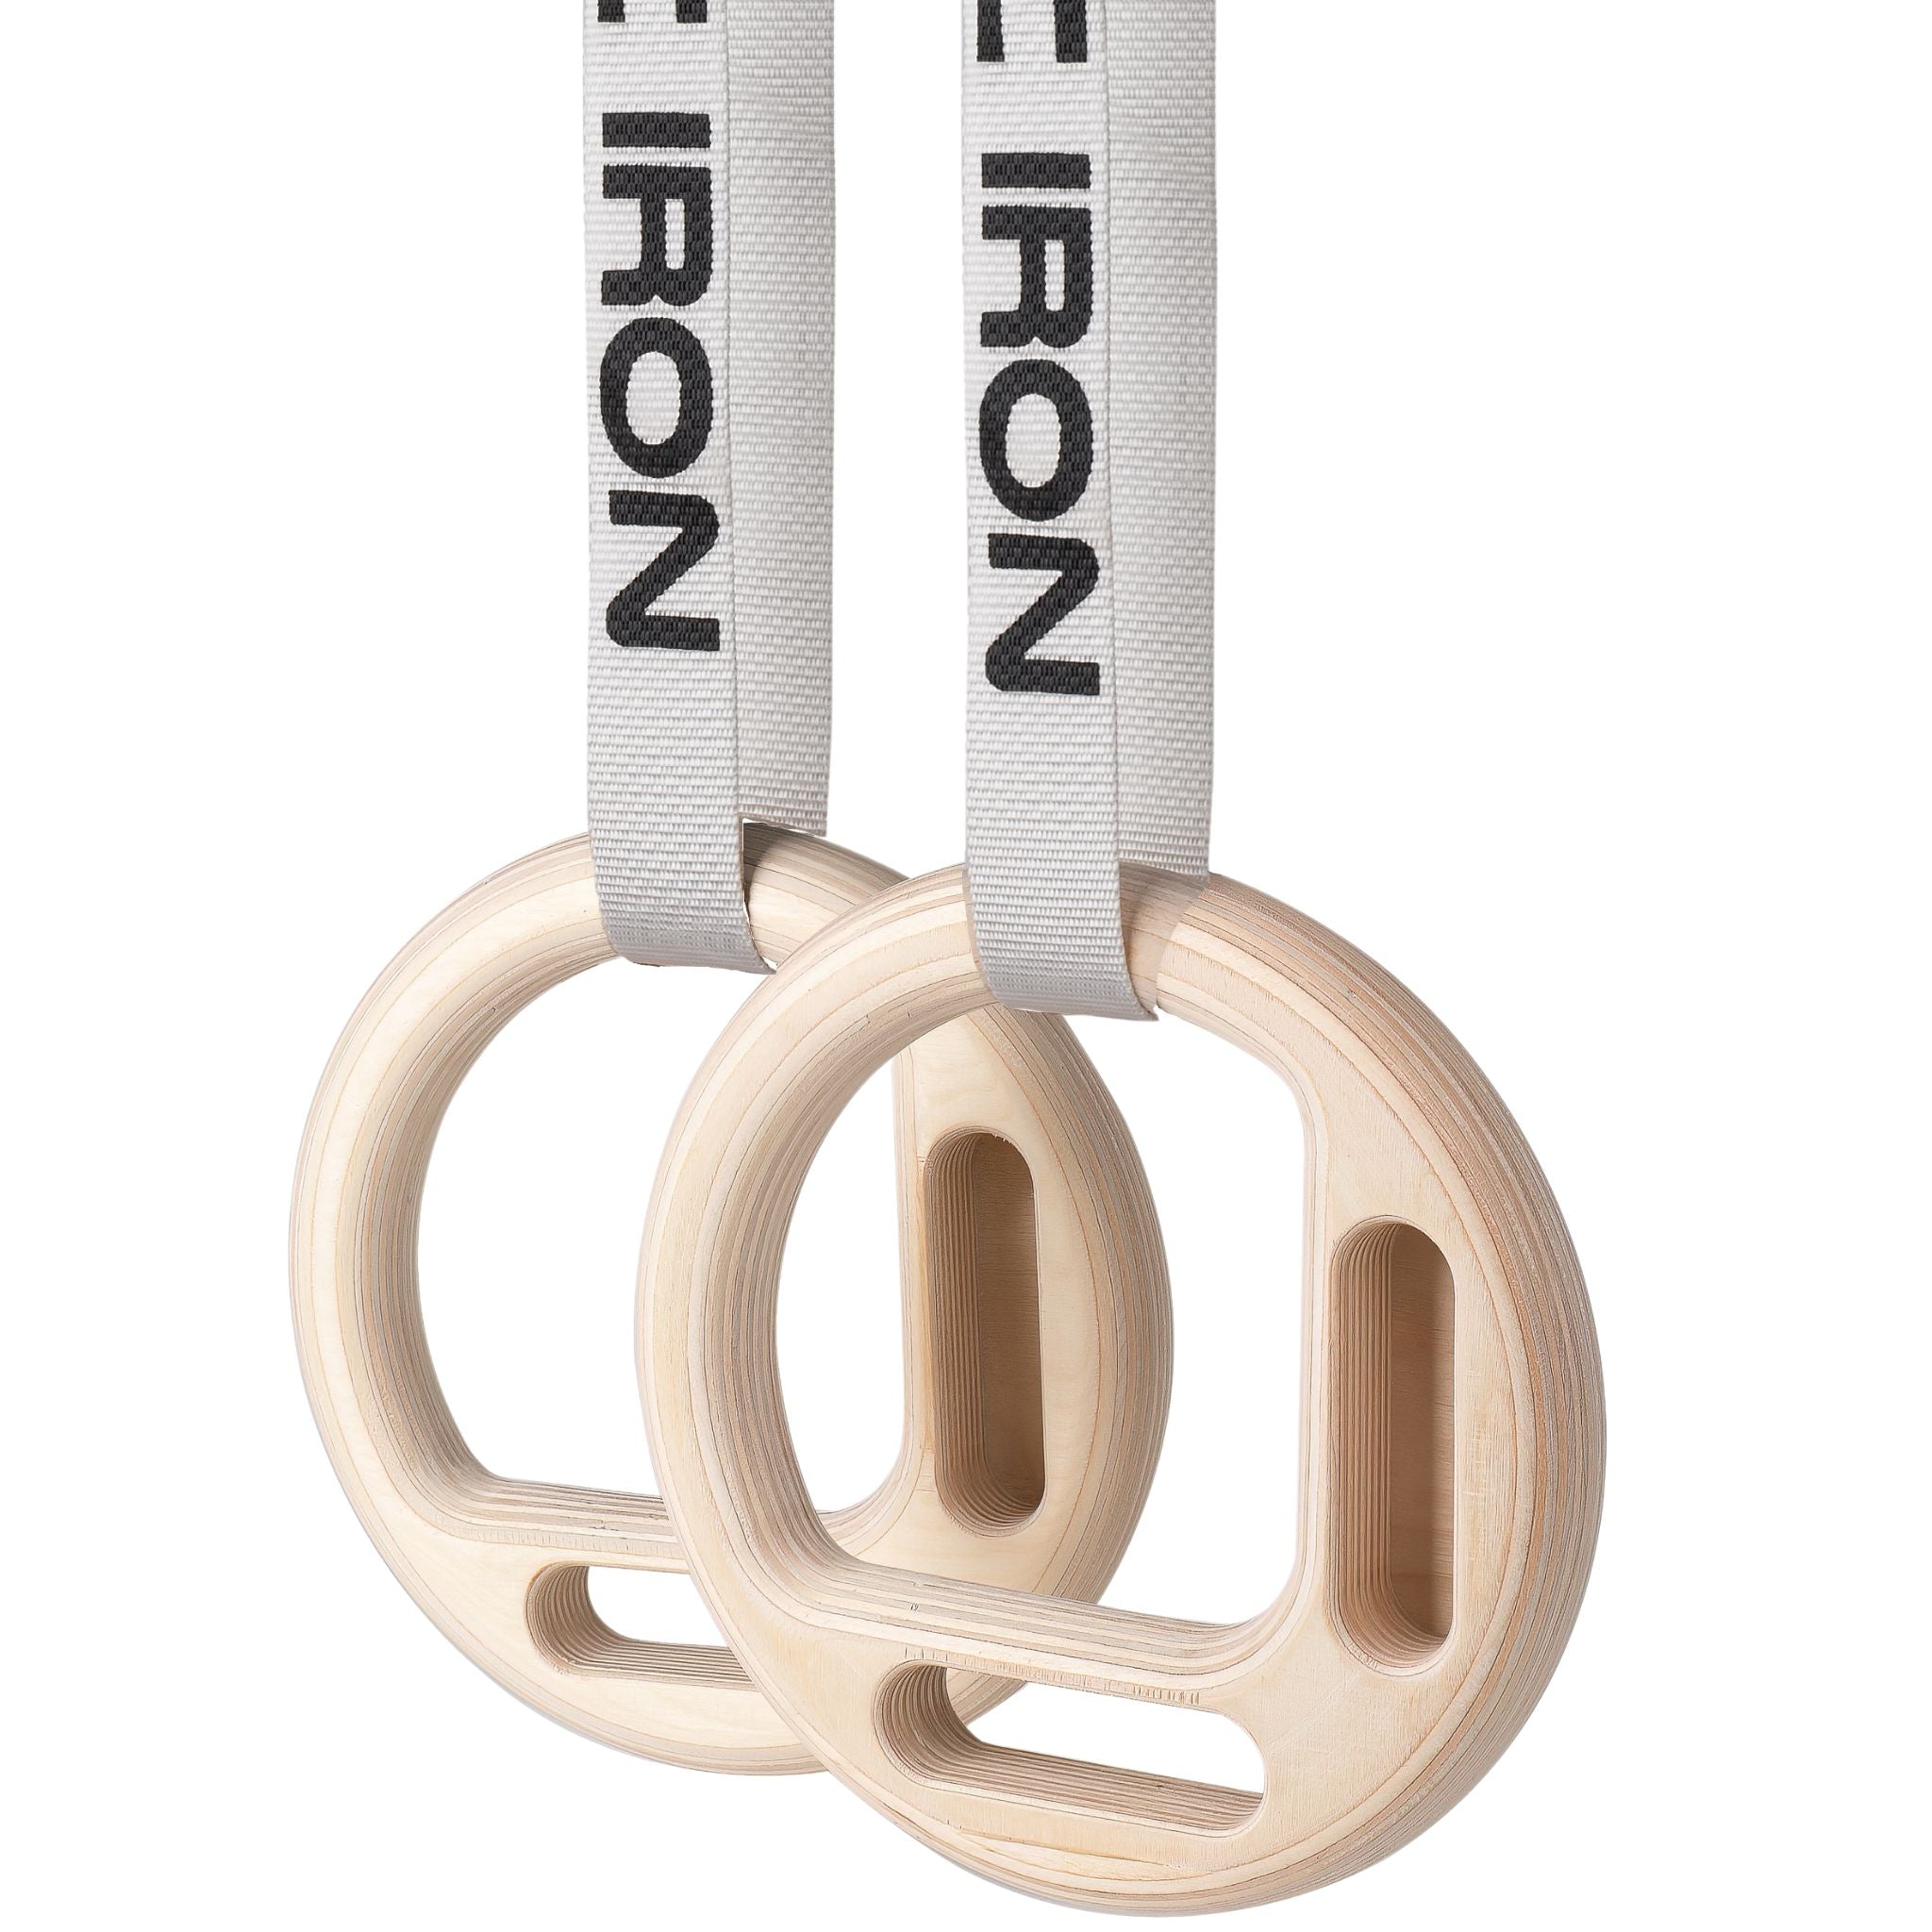 Hangboard rings with white straps by atomic iron